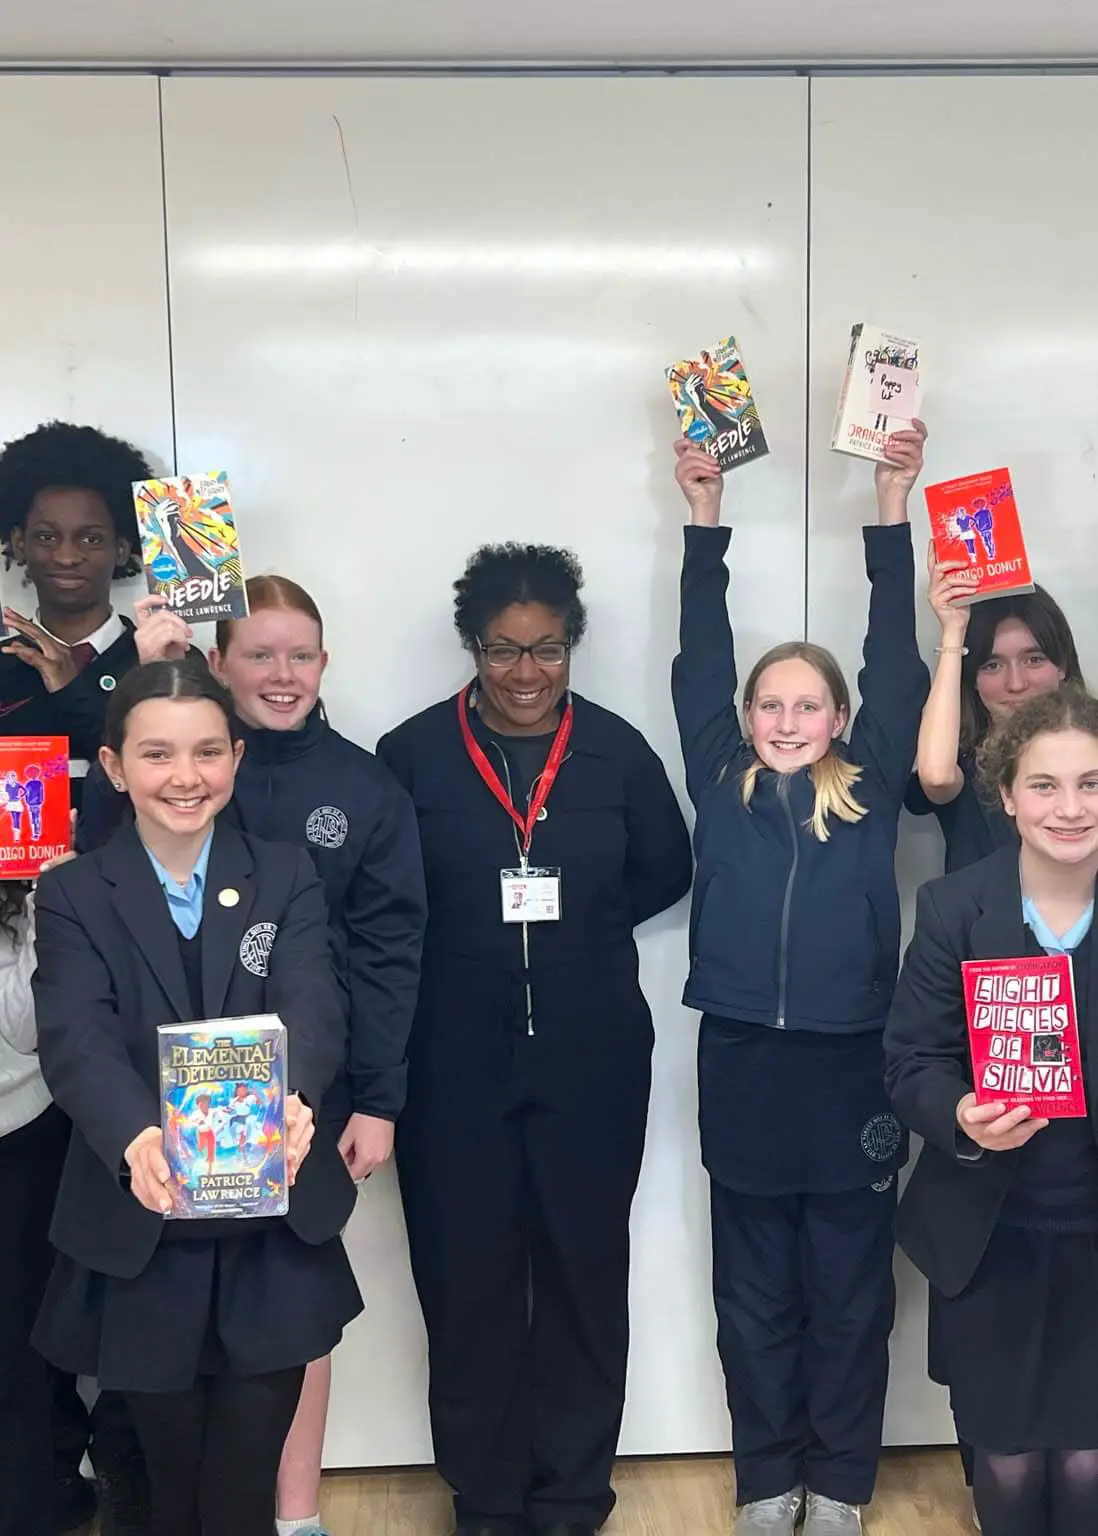 Pupils standing with Patrice Lawrence with his books in their hands.